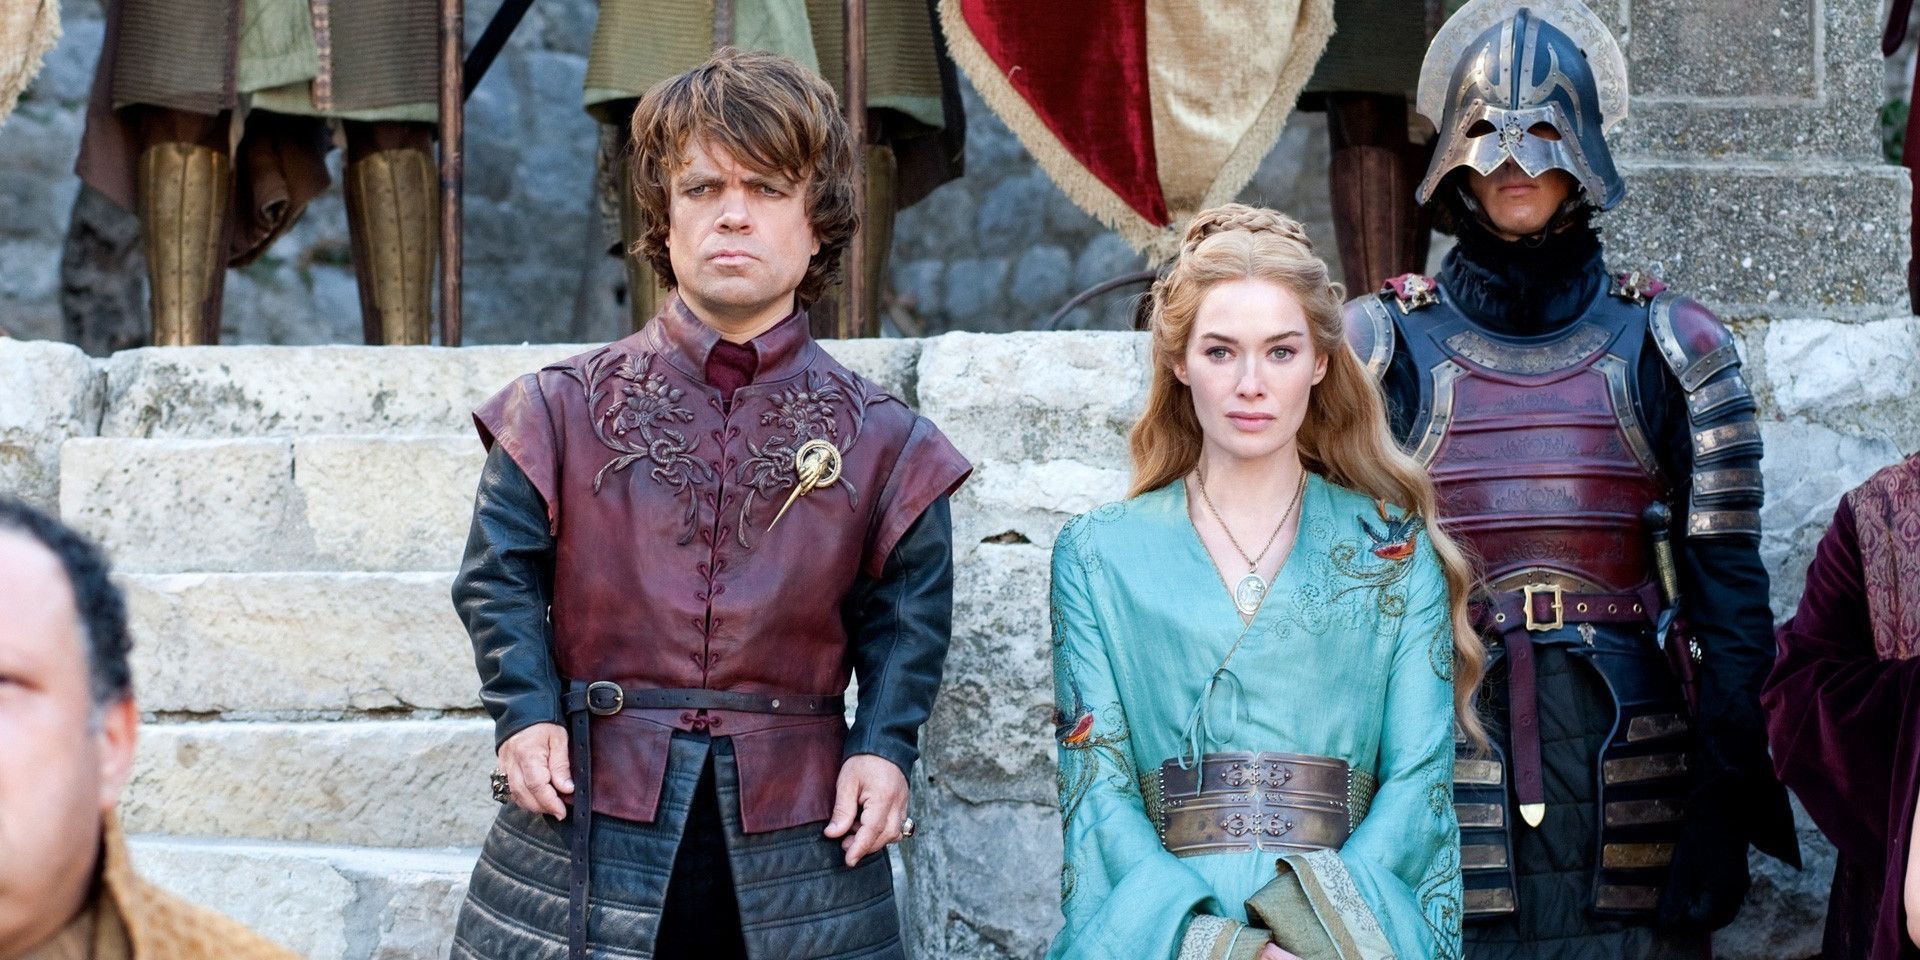 Tyrion Lannister and Cersei